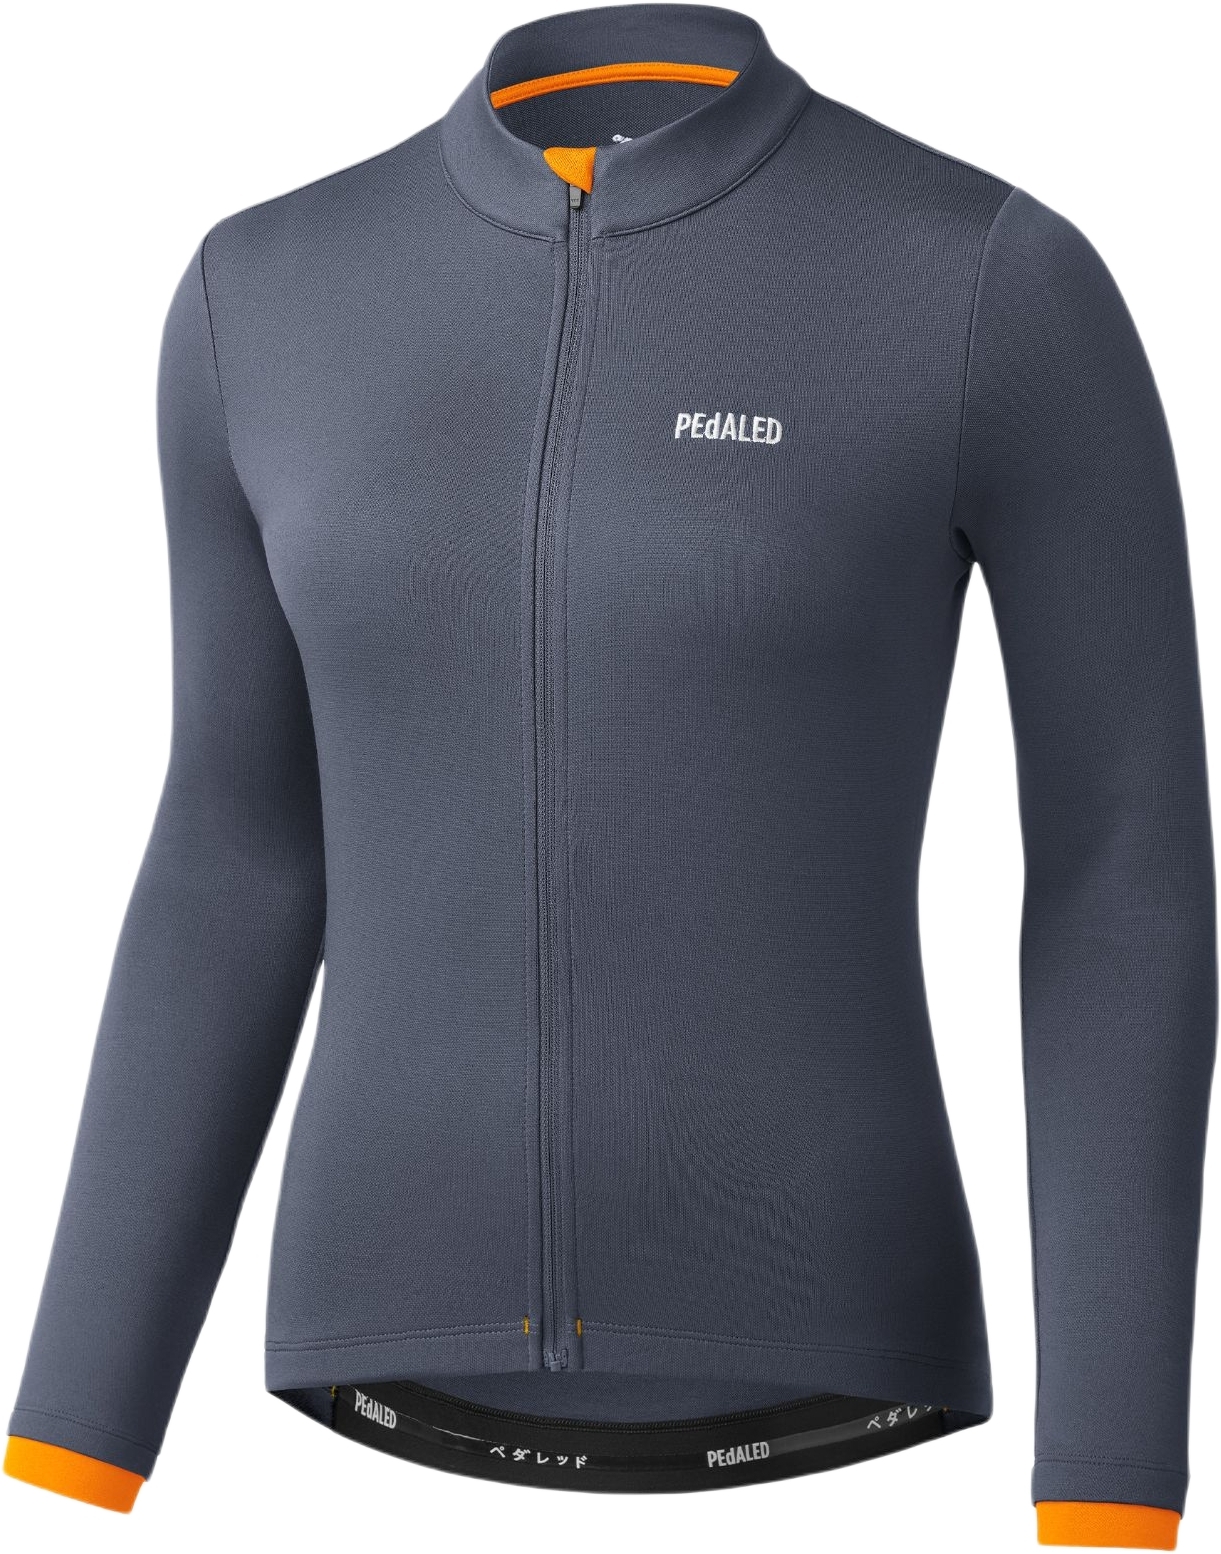 E-shop PEdALED W's Essential Merino Longsleeve Jersey - Indian Ink M